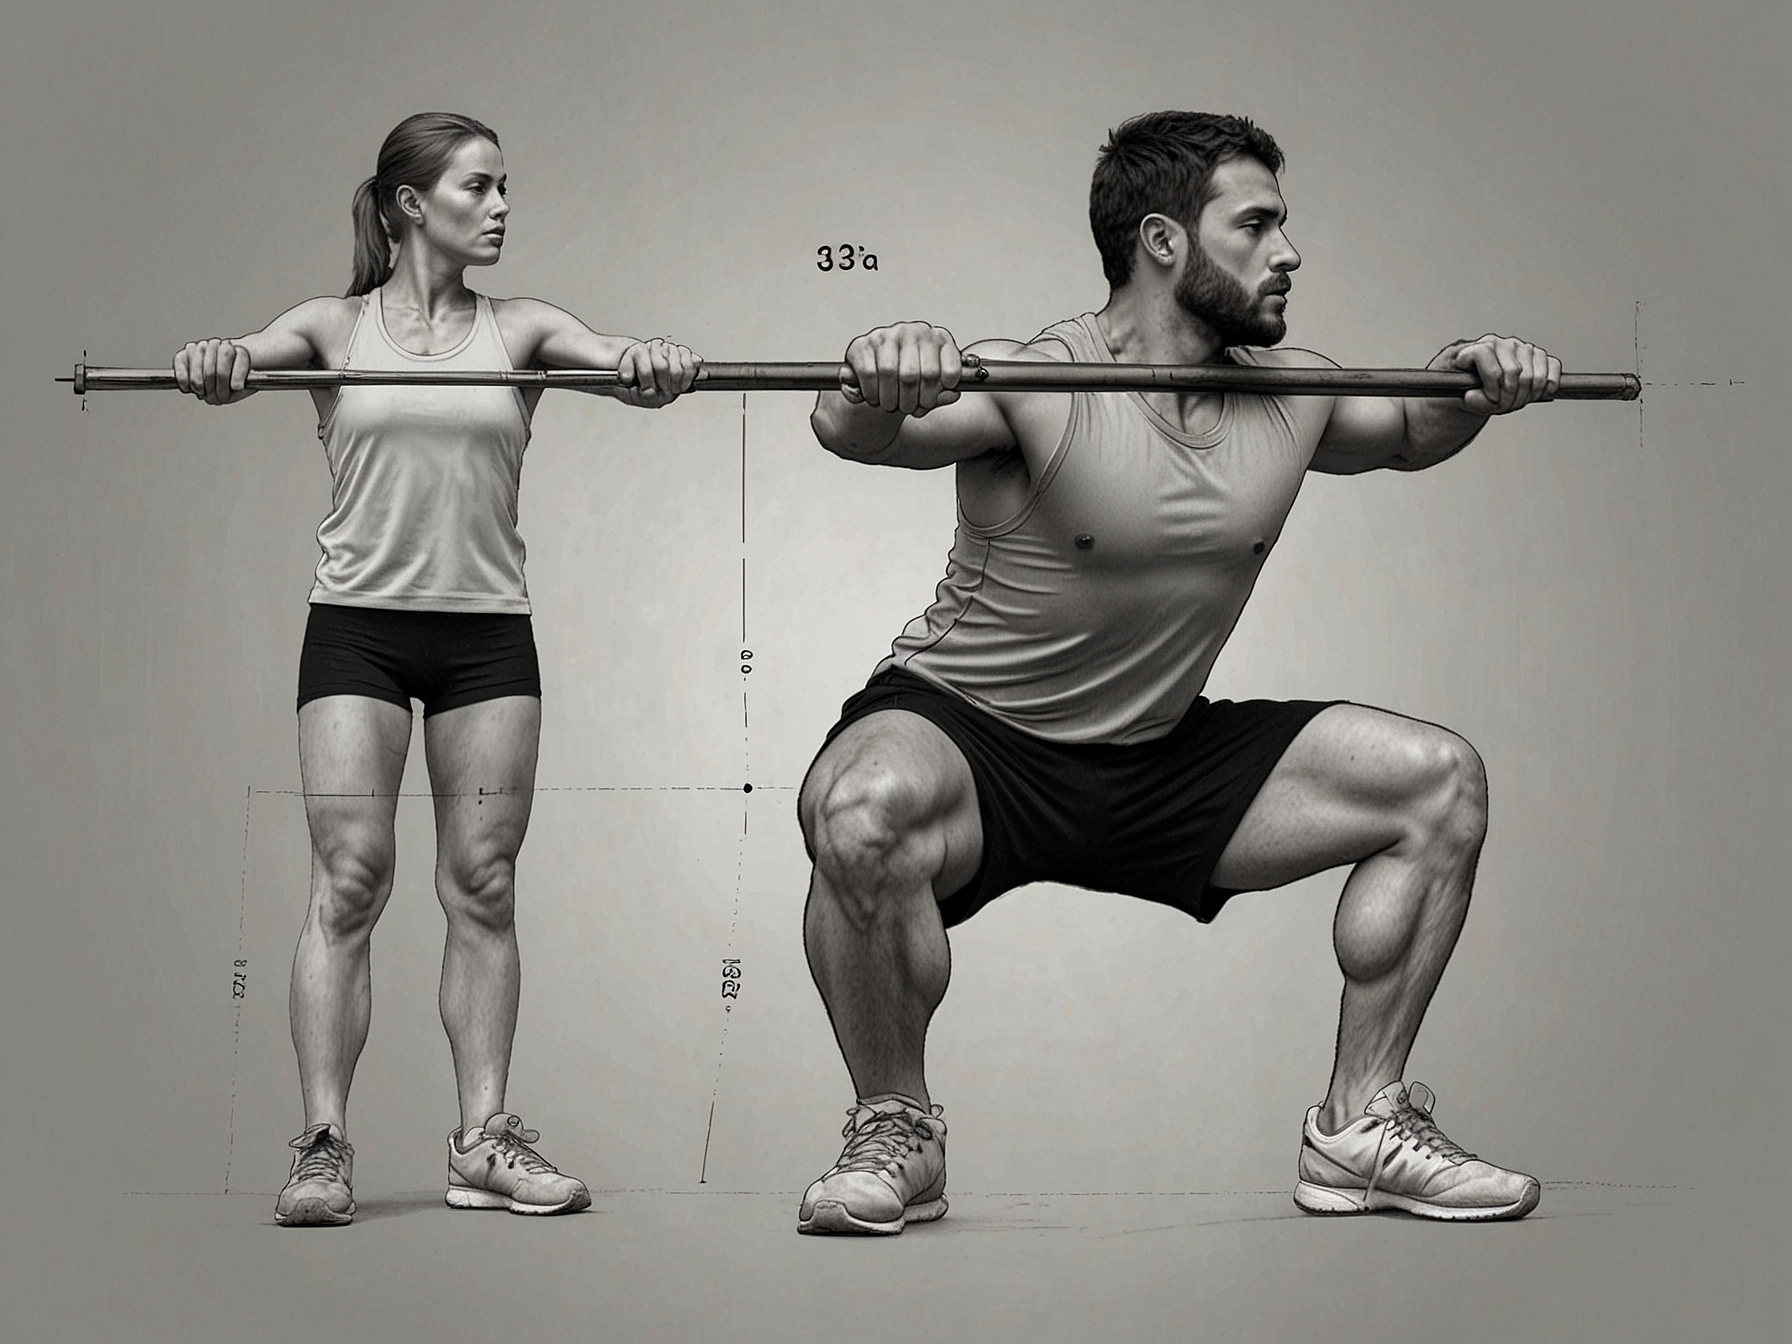 The second image captures the transition from the hinge to the squat position, with the person bending their knees and lowering their hips towards the floor, demonstrating the full range of motion.